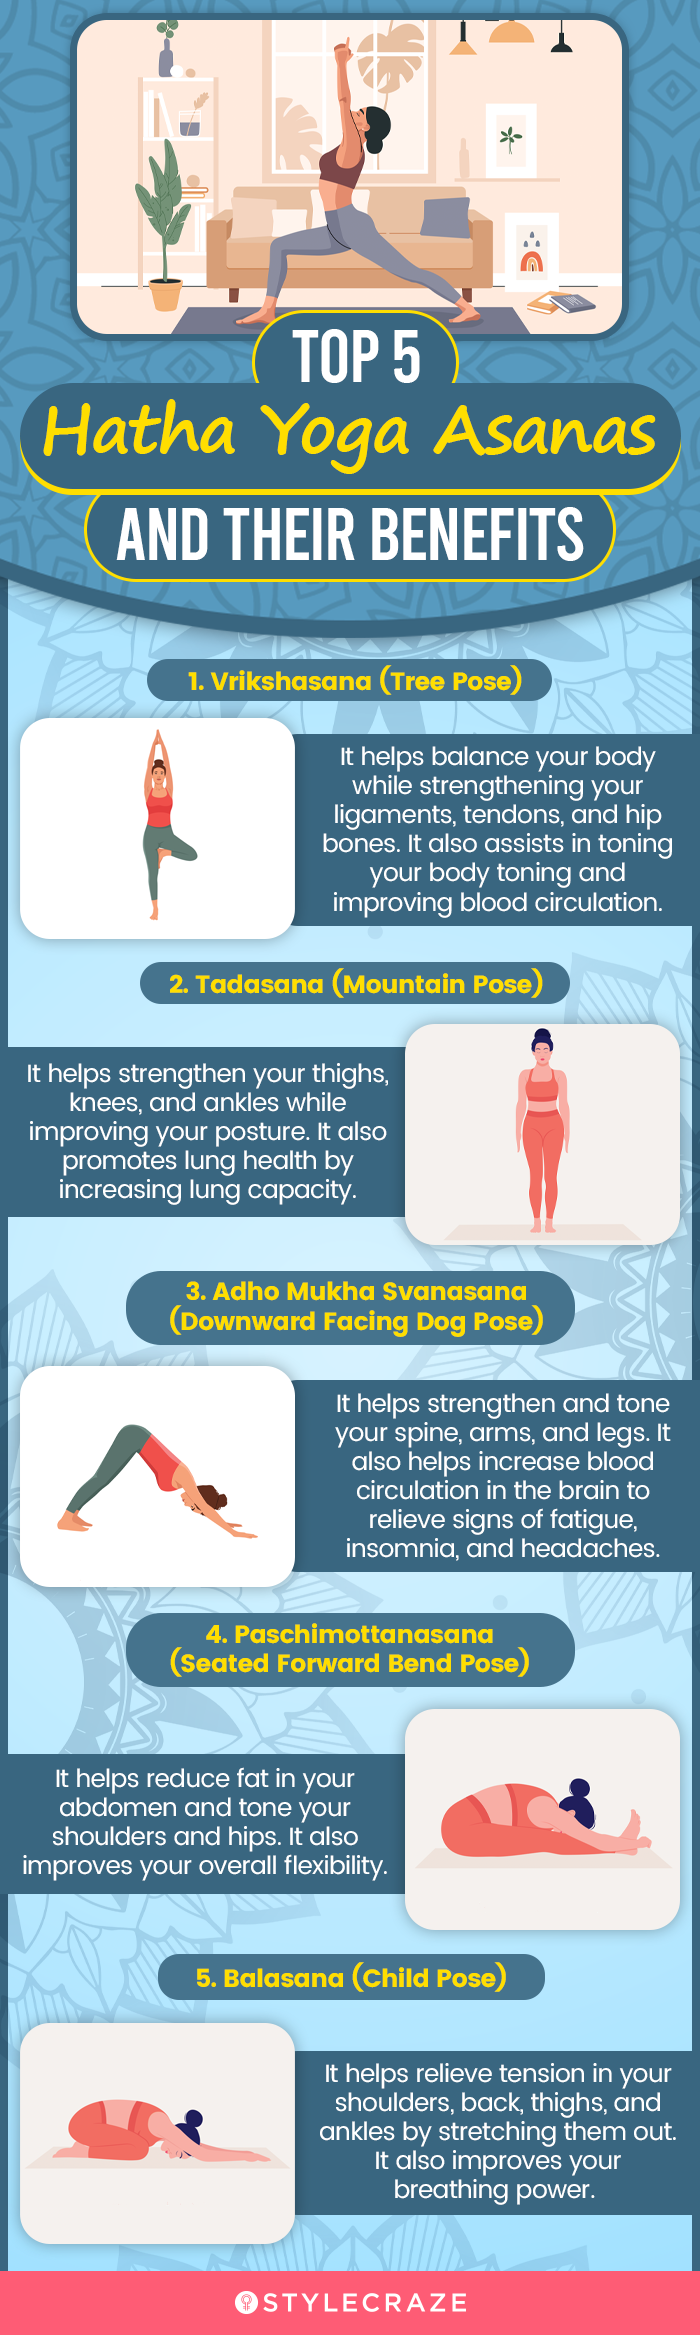 How To Do Halasana Yoga (Plow Pose) And What Are Its Benefits